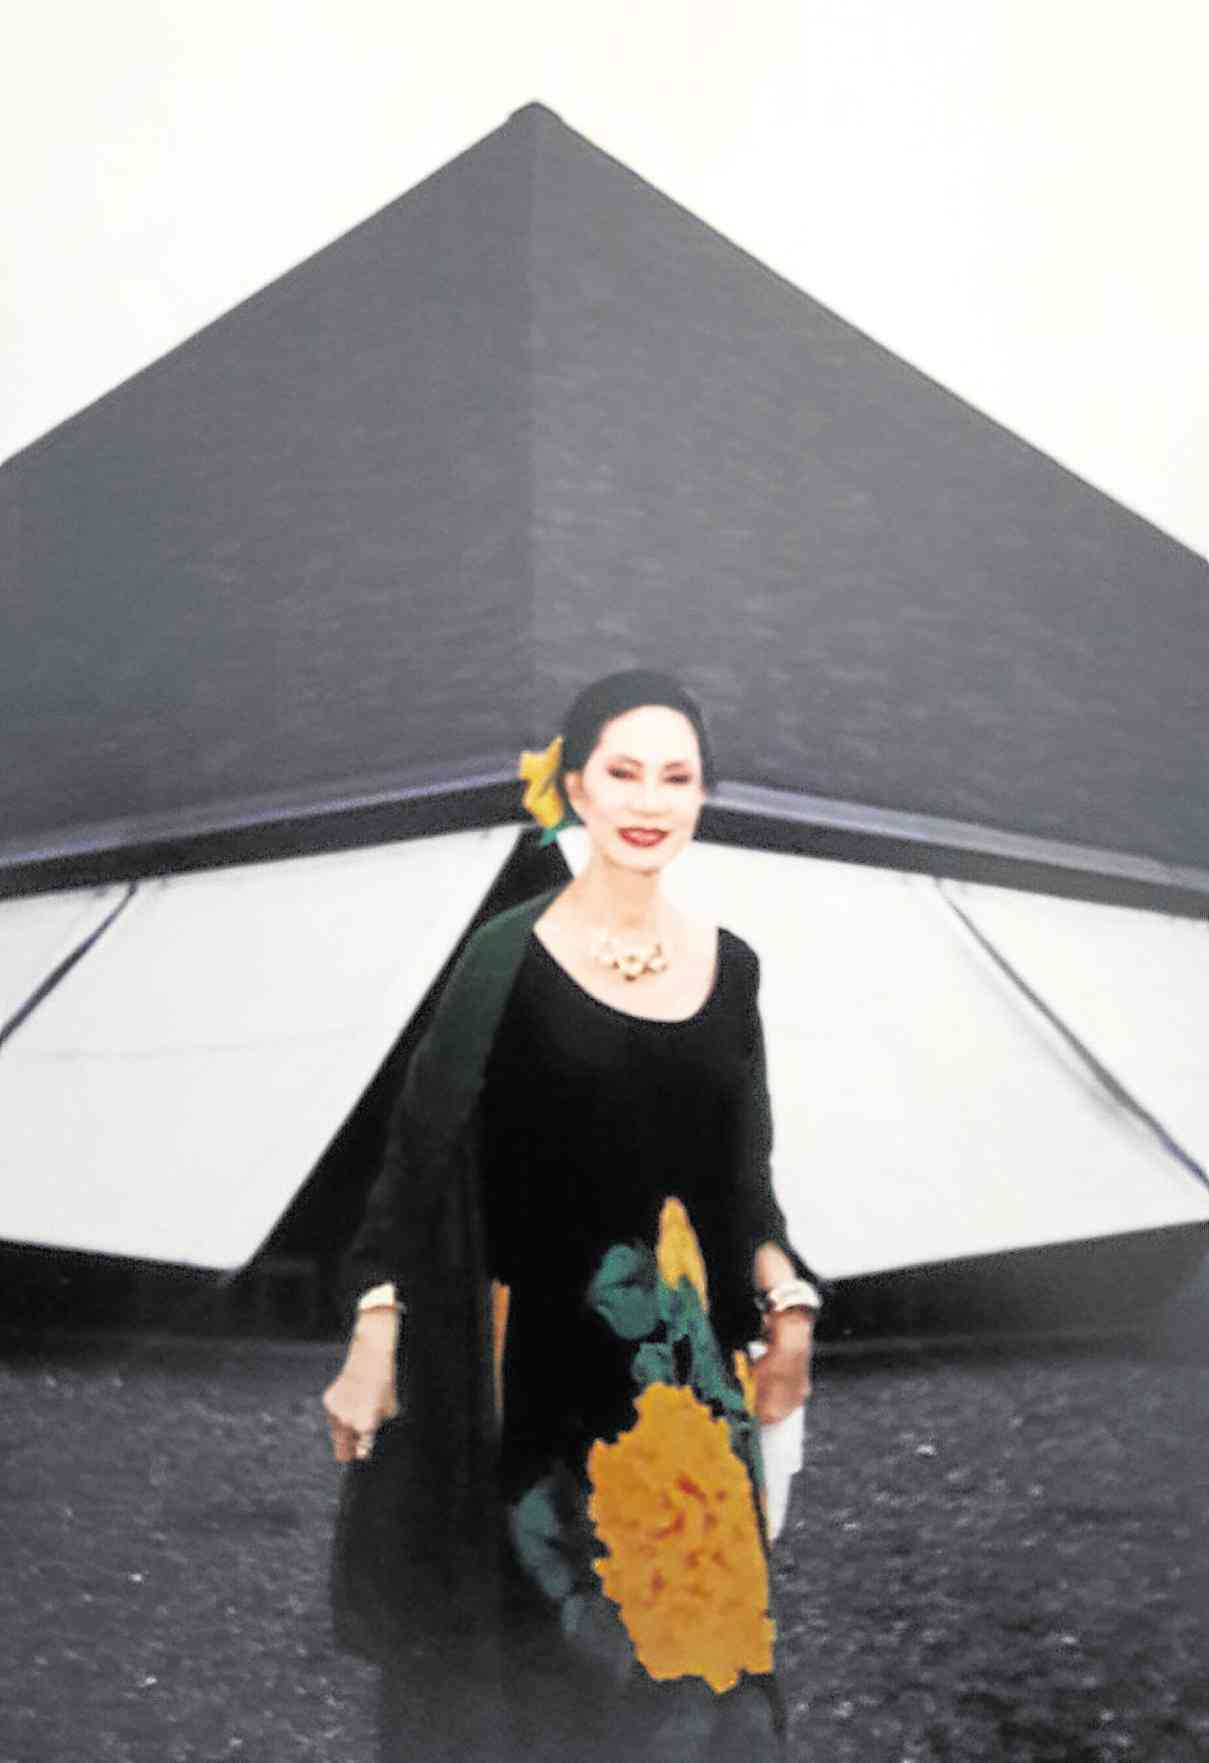 MELDY Cojuangco in front of the Church of the Transfiguration designed by National Artist Leandro Locsin